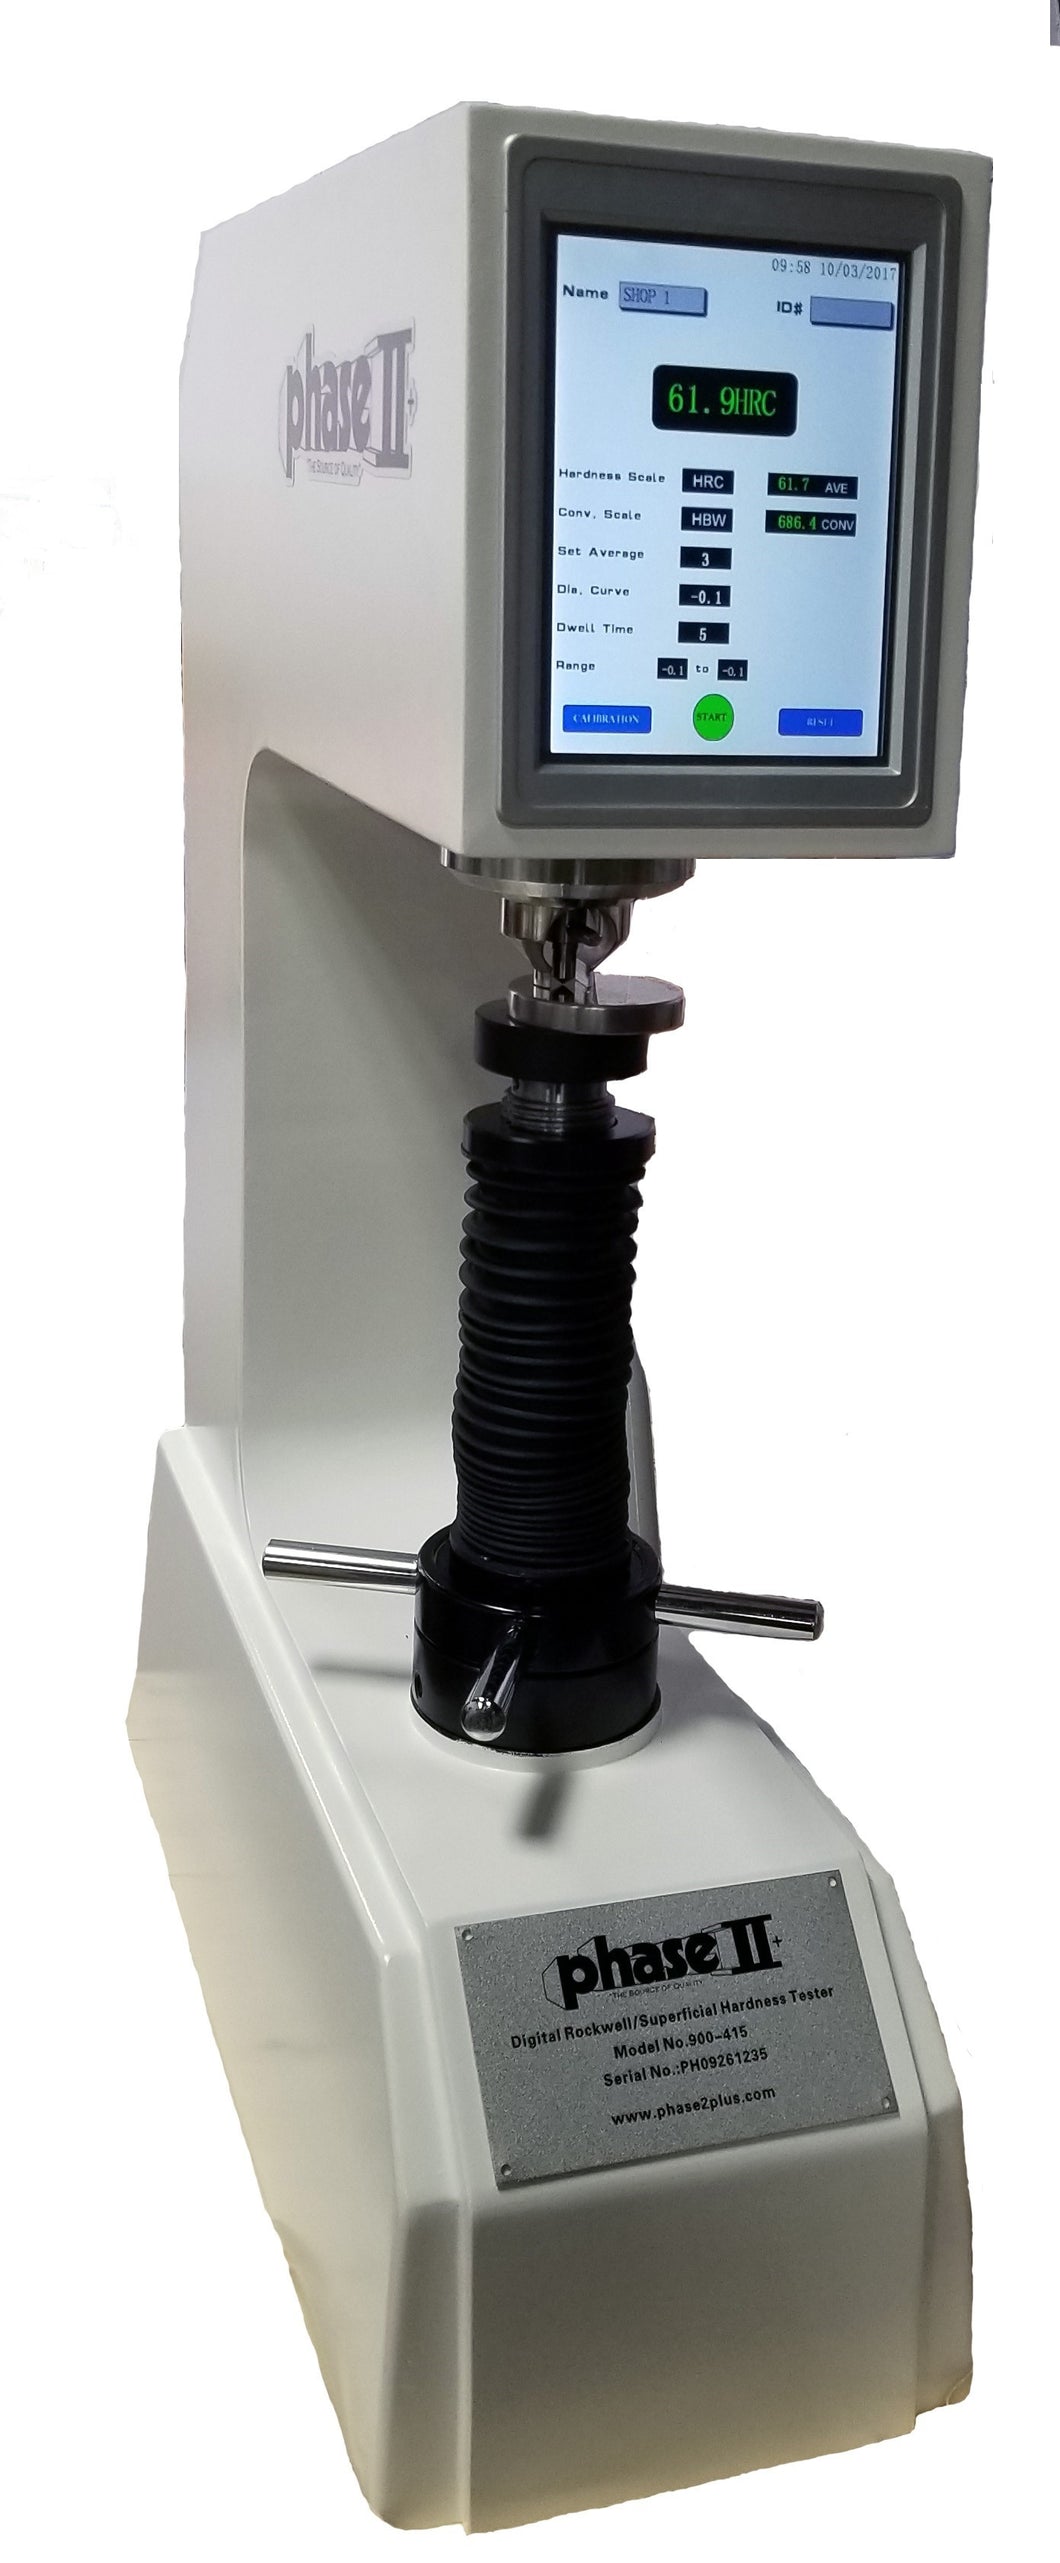 Digital Twin Rockwell Superficial Hardness Tester Phase II Model 900-440